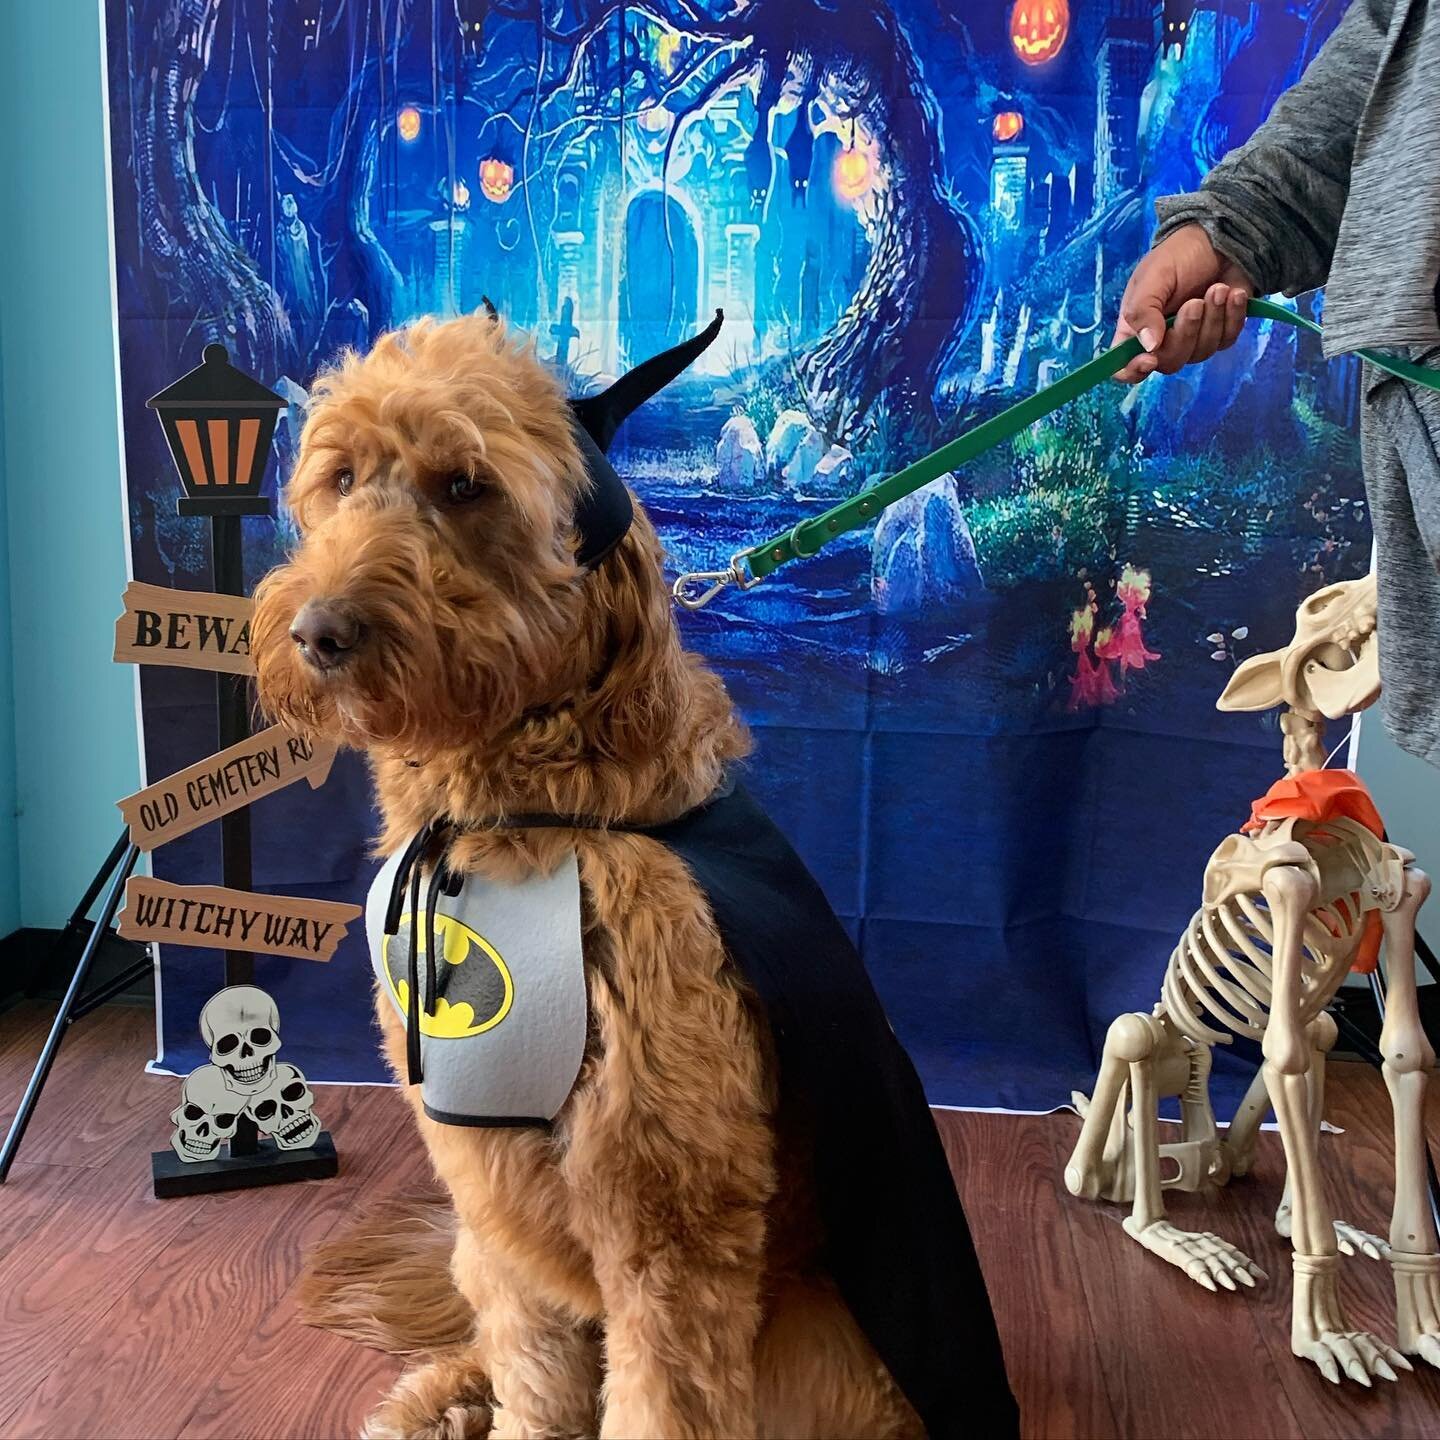 Charlie has entered the competition as Batman 🦇No ghosts dare go up against that side eye!

Let&rsquo;s give him some love ✨🐾

#TheDogStay #ThePackInc #BrightenYourDay #LovePaws #DoggyDaycare #WoofOfJuly #Pupsicles #JoinUsToday #FureverFriends #Dow